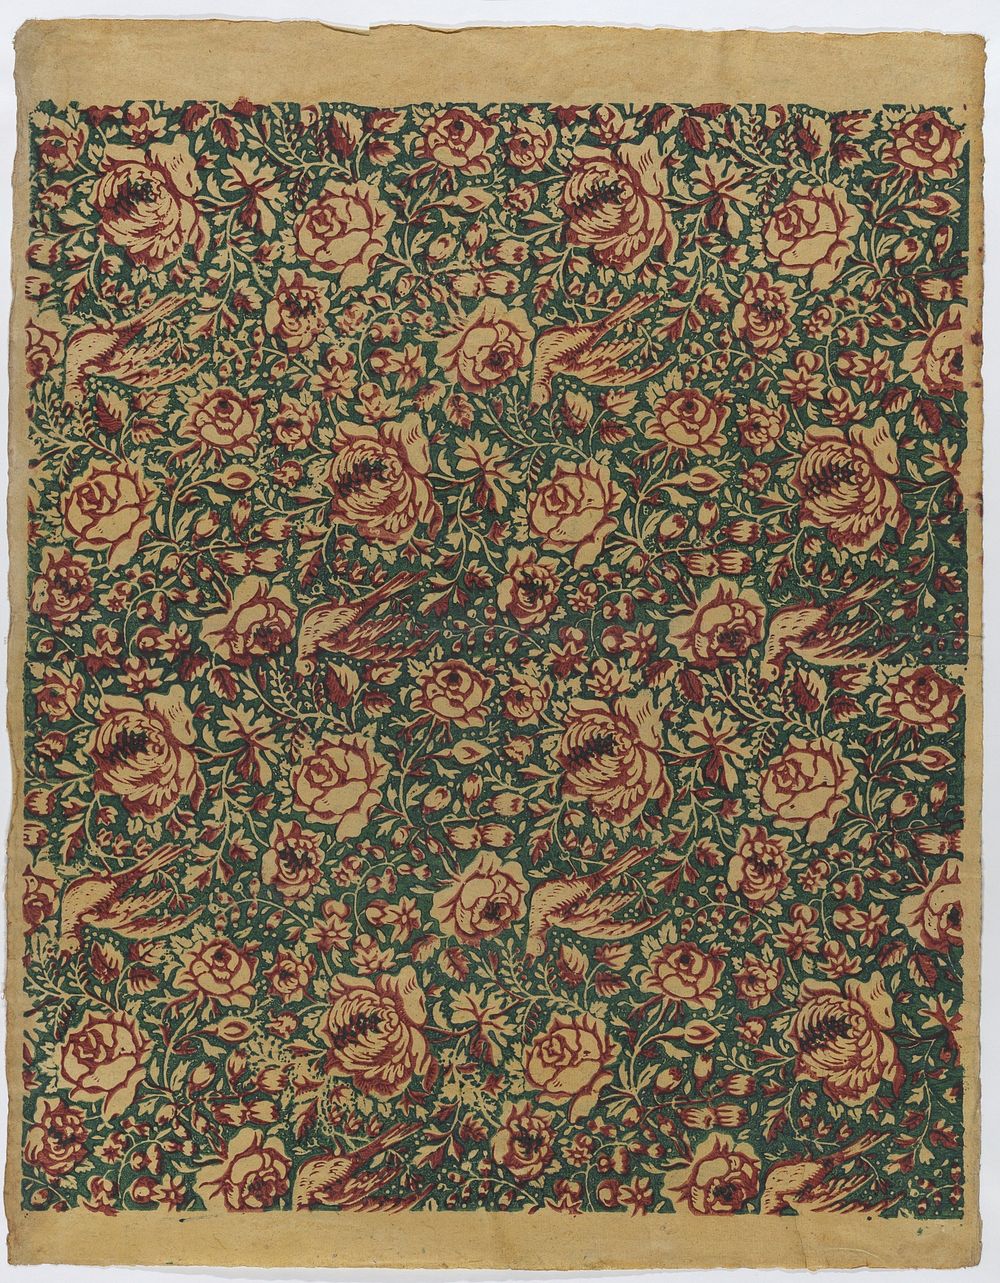 Sheet with overall floral pattern with birds by Anonymous